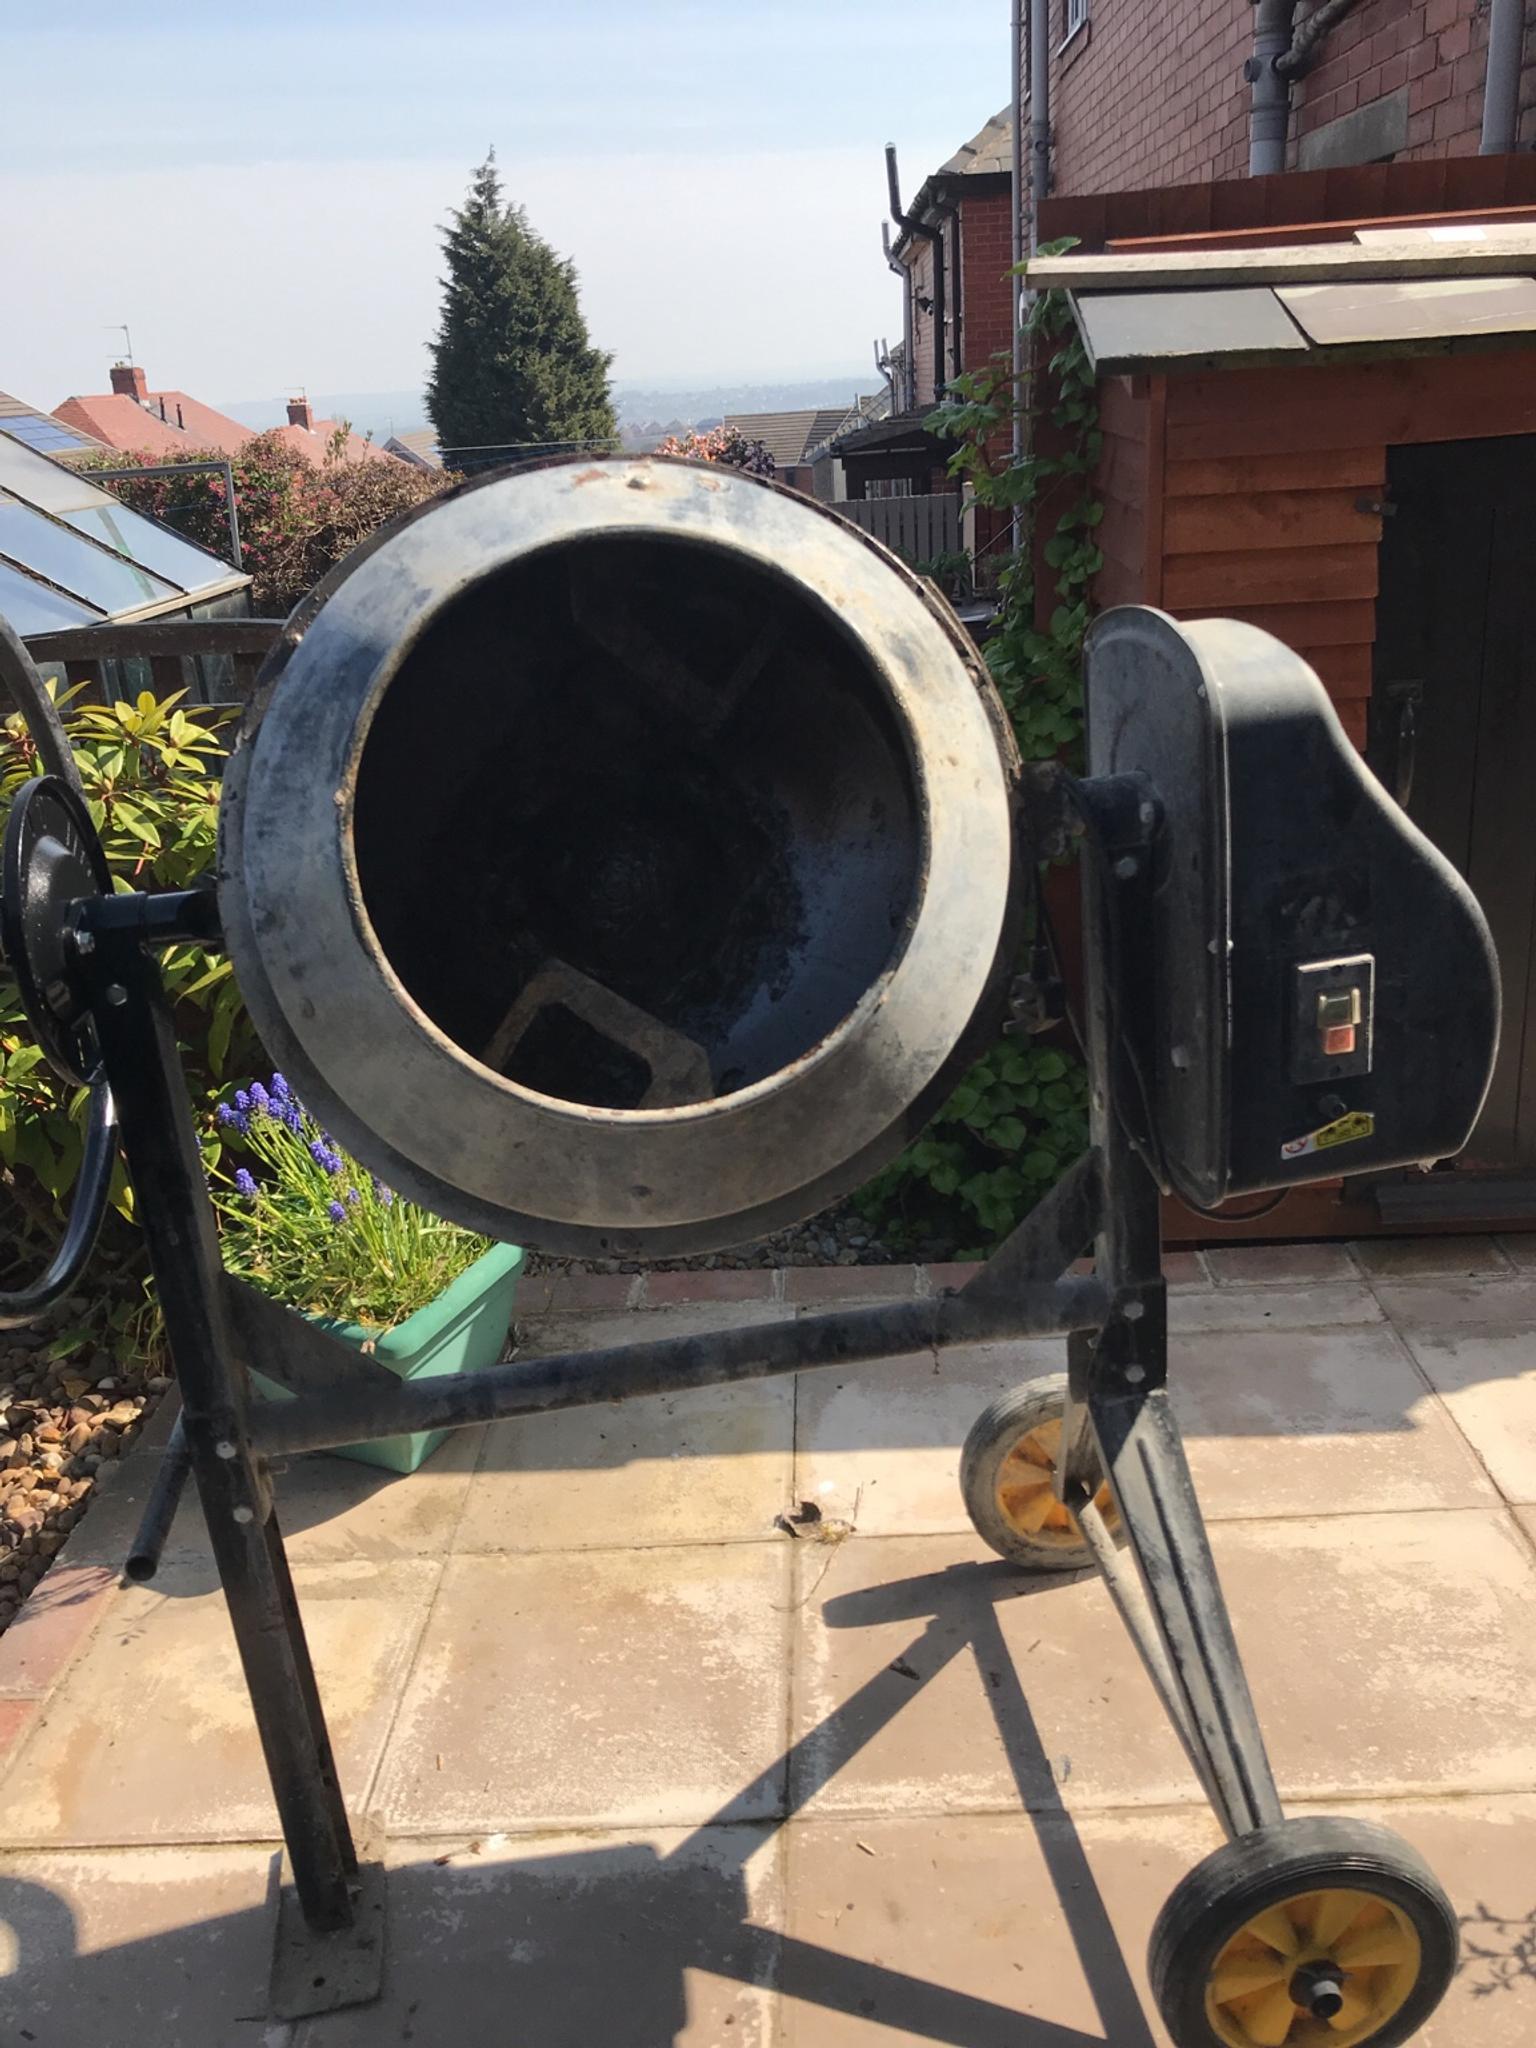 Cement mixer in S70 Barnsley for £80.00 for sale | Shpock